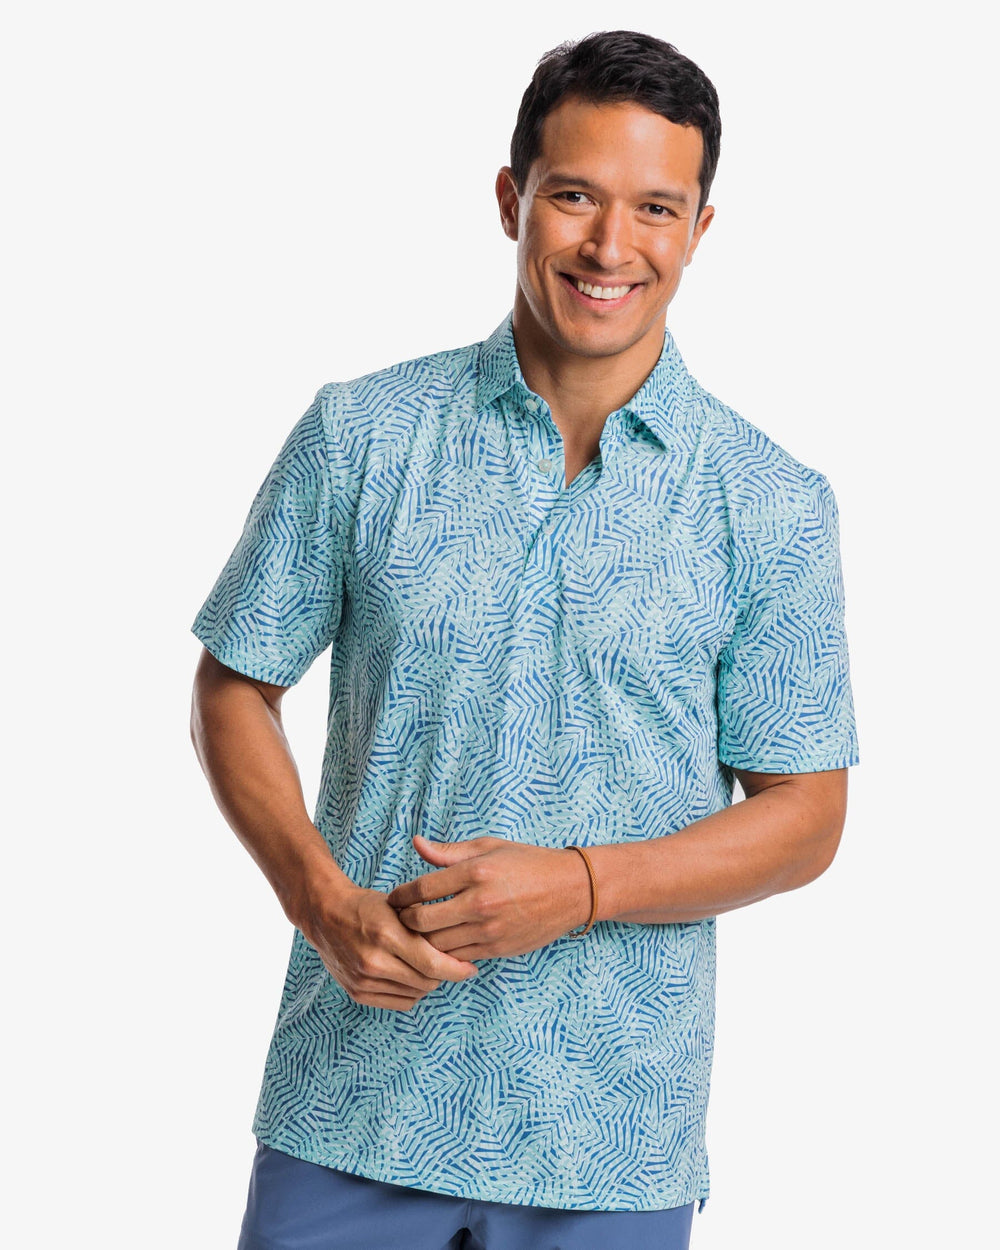 The front view of the Southern Tide Driver Vibin Palm Print Performance Polo Shirt by Southern Tide - Atlantic Blue